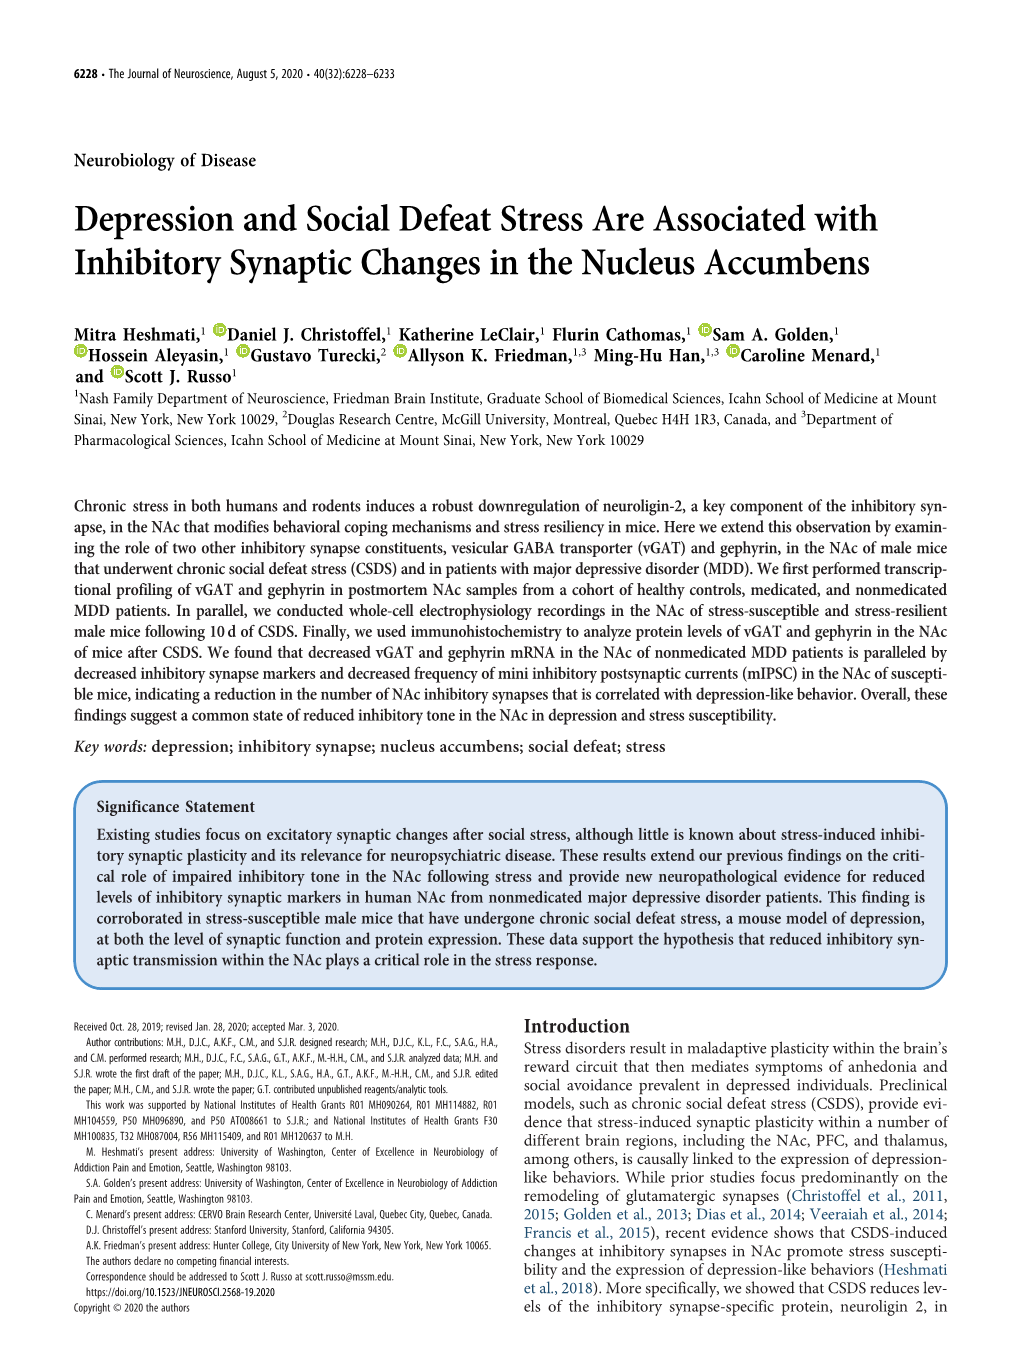 Depression and Social Defeat Stress Are Associated with Inhibitory Synaptic Changes in the Nucleus Accumbens